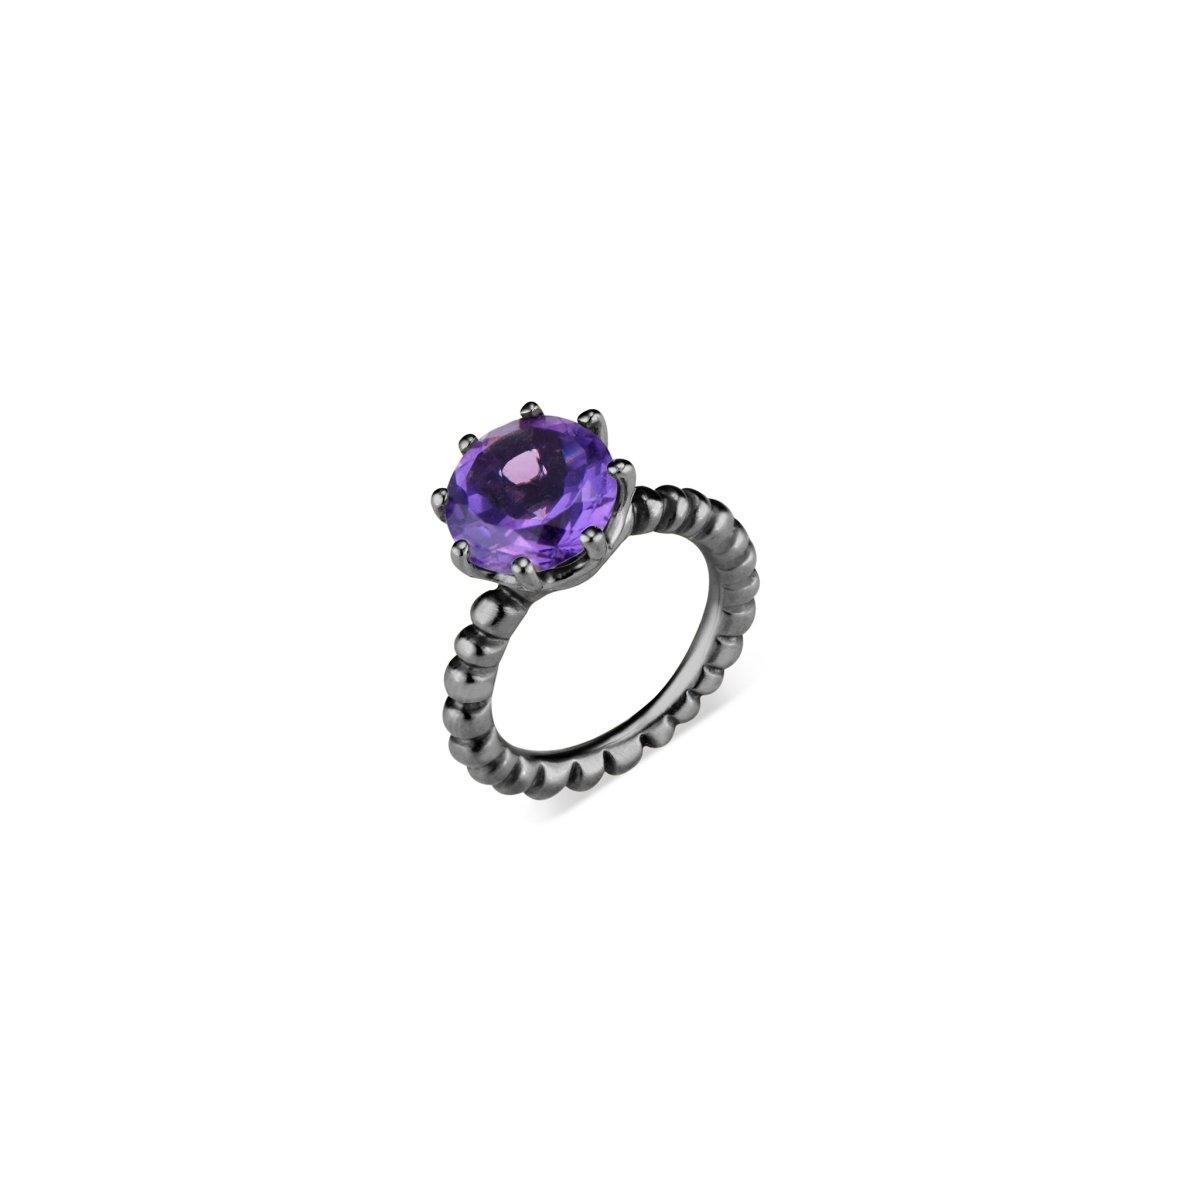 Amethyst Crown Ring - Nataly Aponte